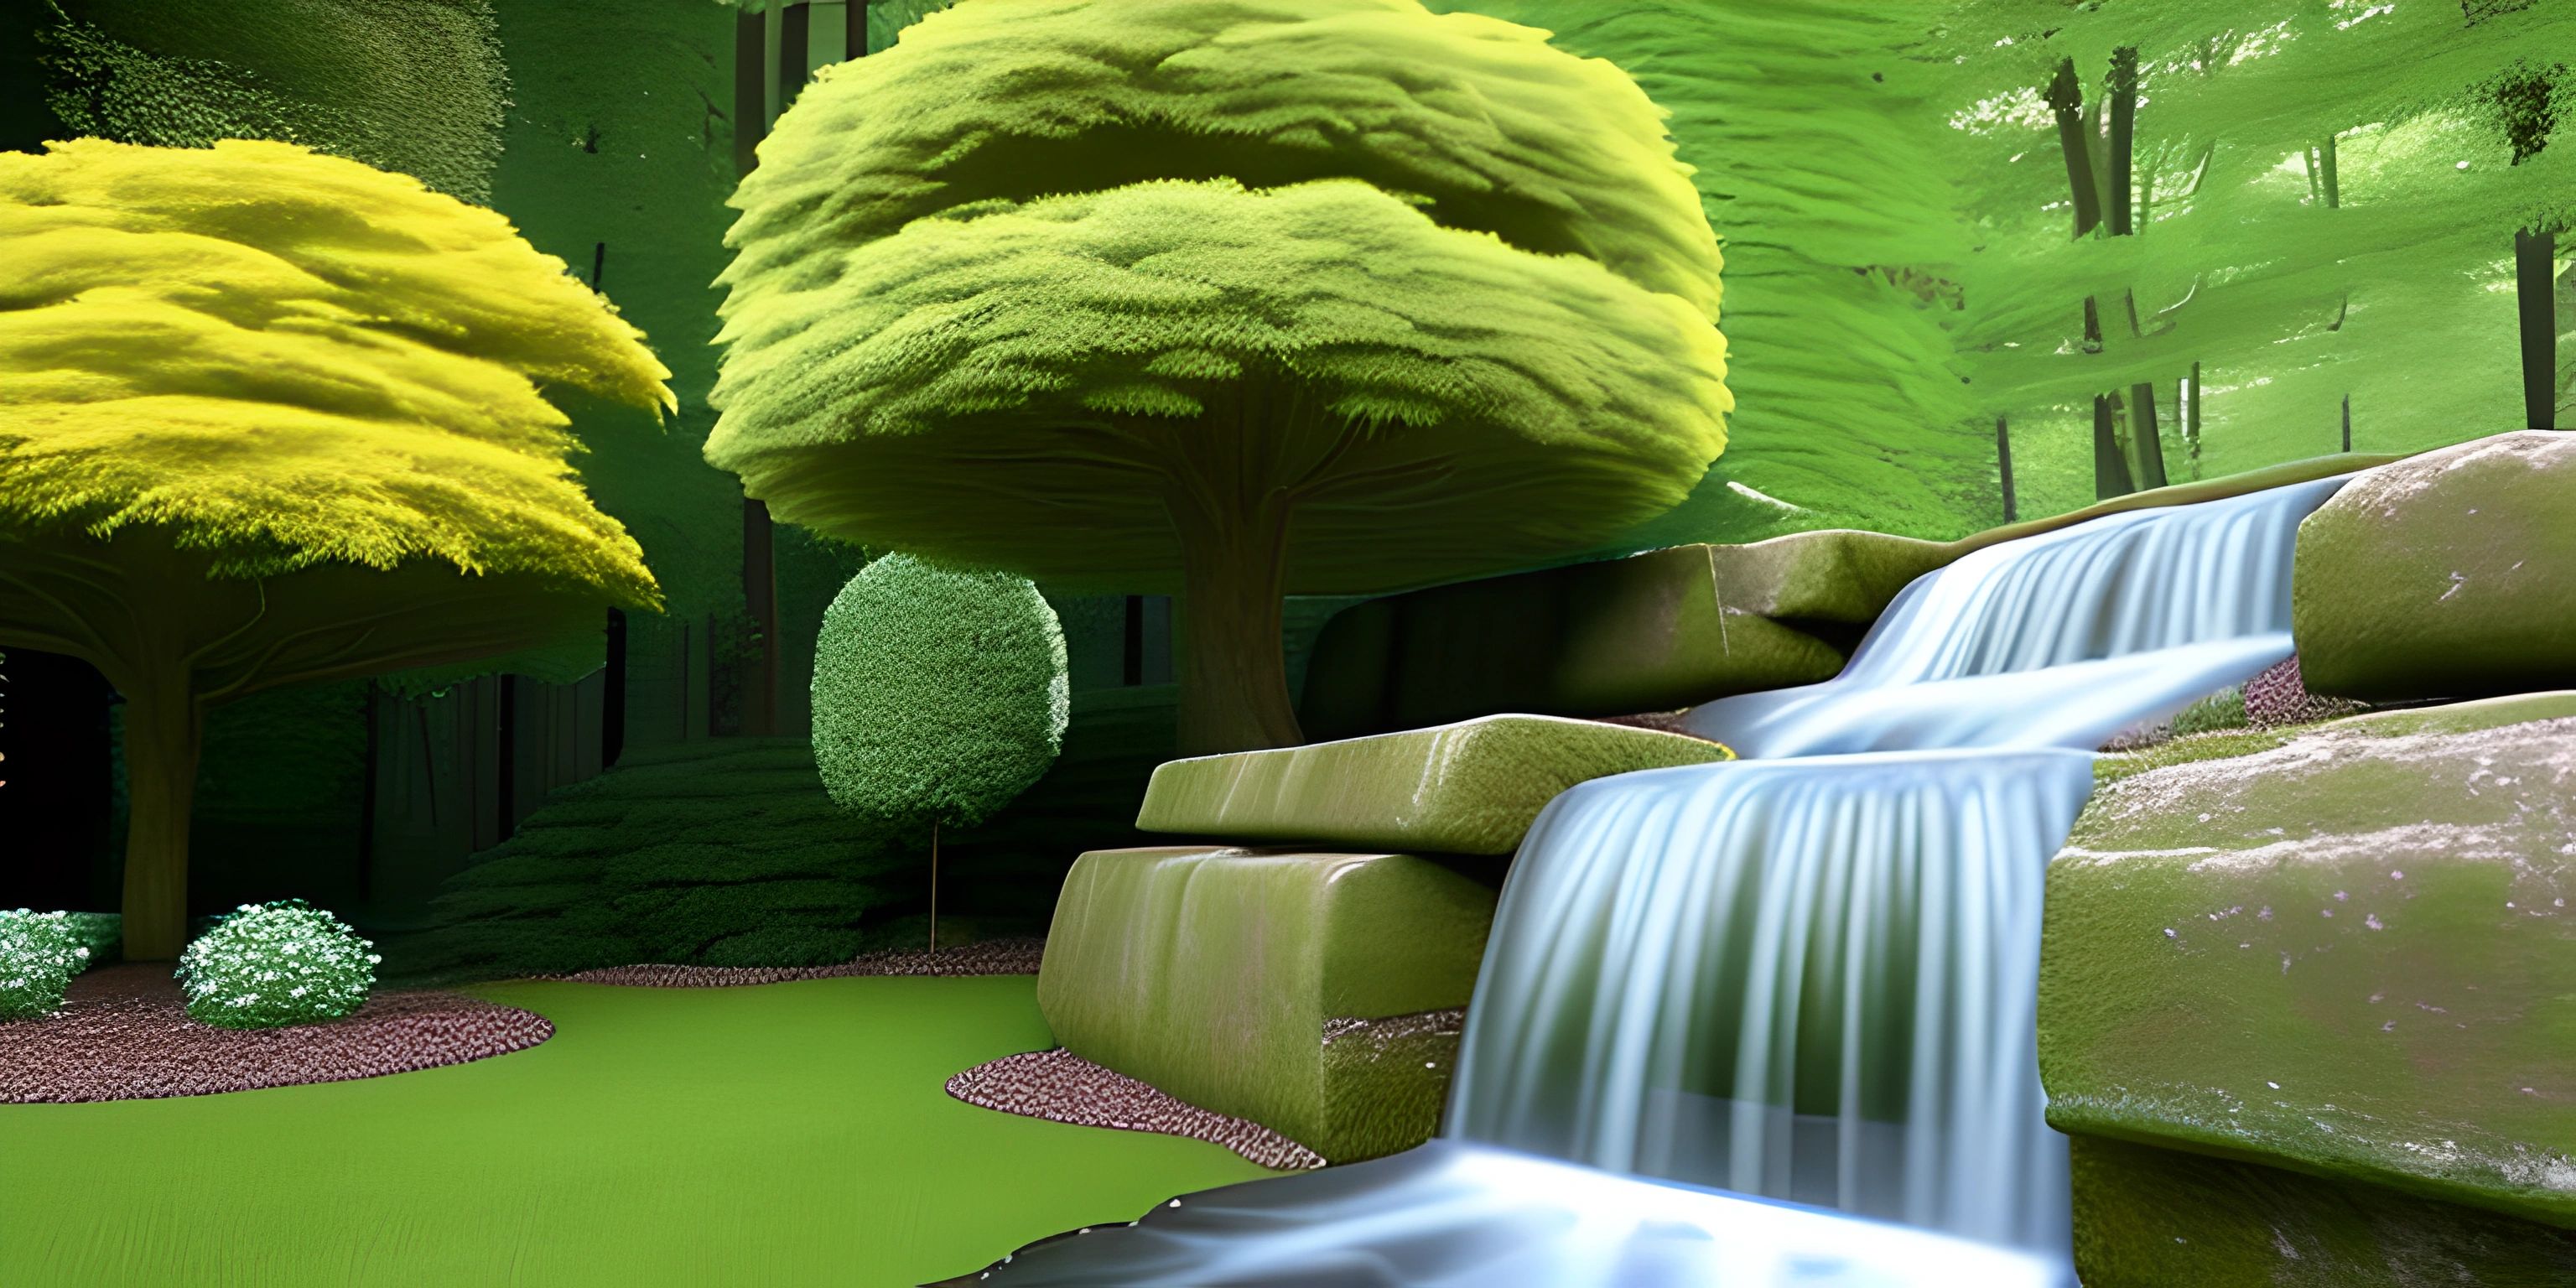 a stream that runs through a grassy area under trees and bushes with moss growing on them